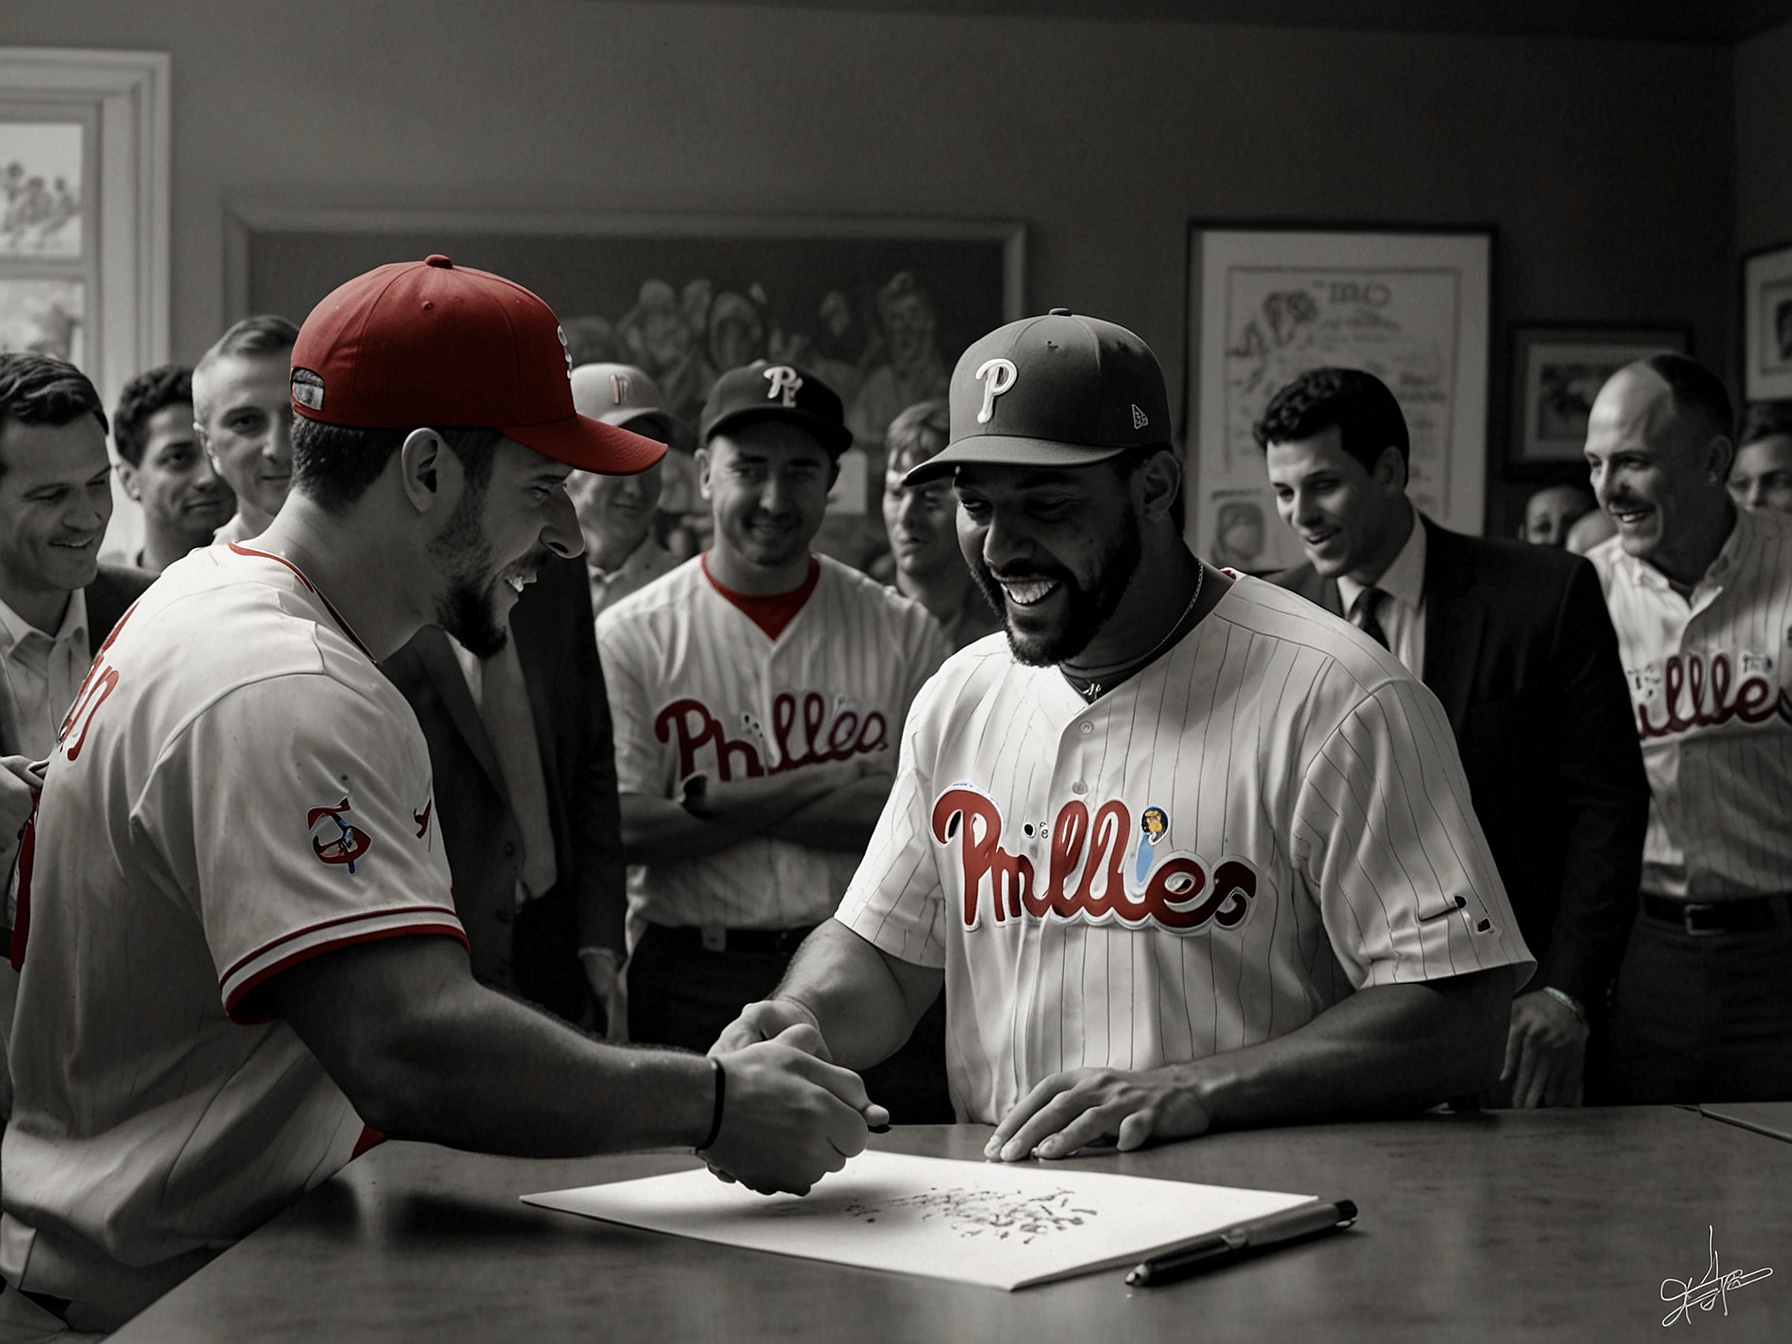 A celebratory moment as Phillies management and Cristopher Sanchez sign the four-year contract extension. The image captures the mutual commitment and excitement for Sanchez's continued presence with the team through 2028.